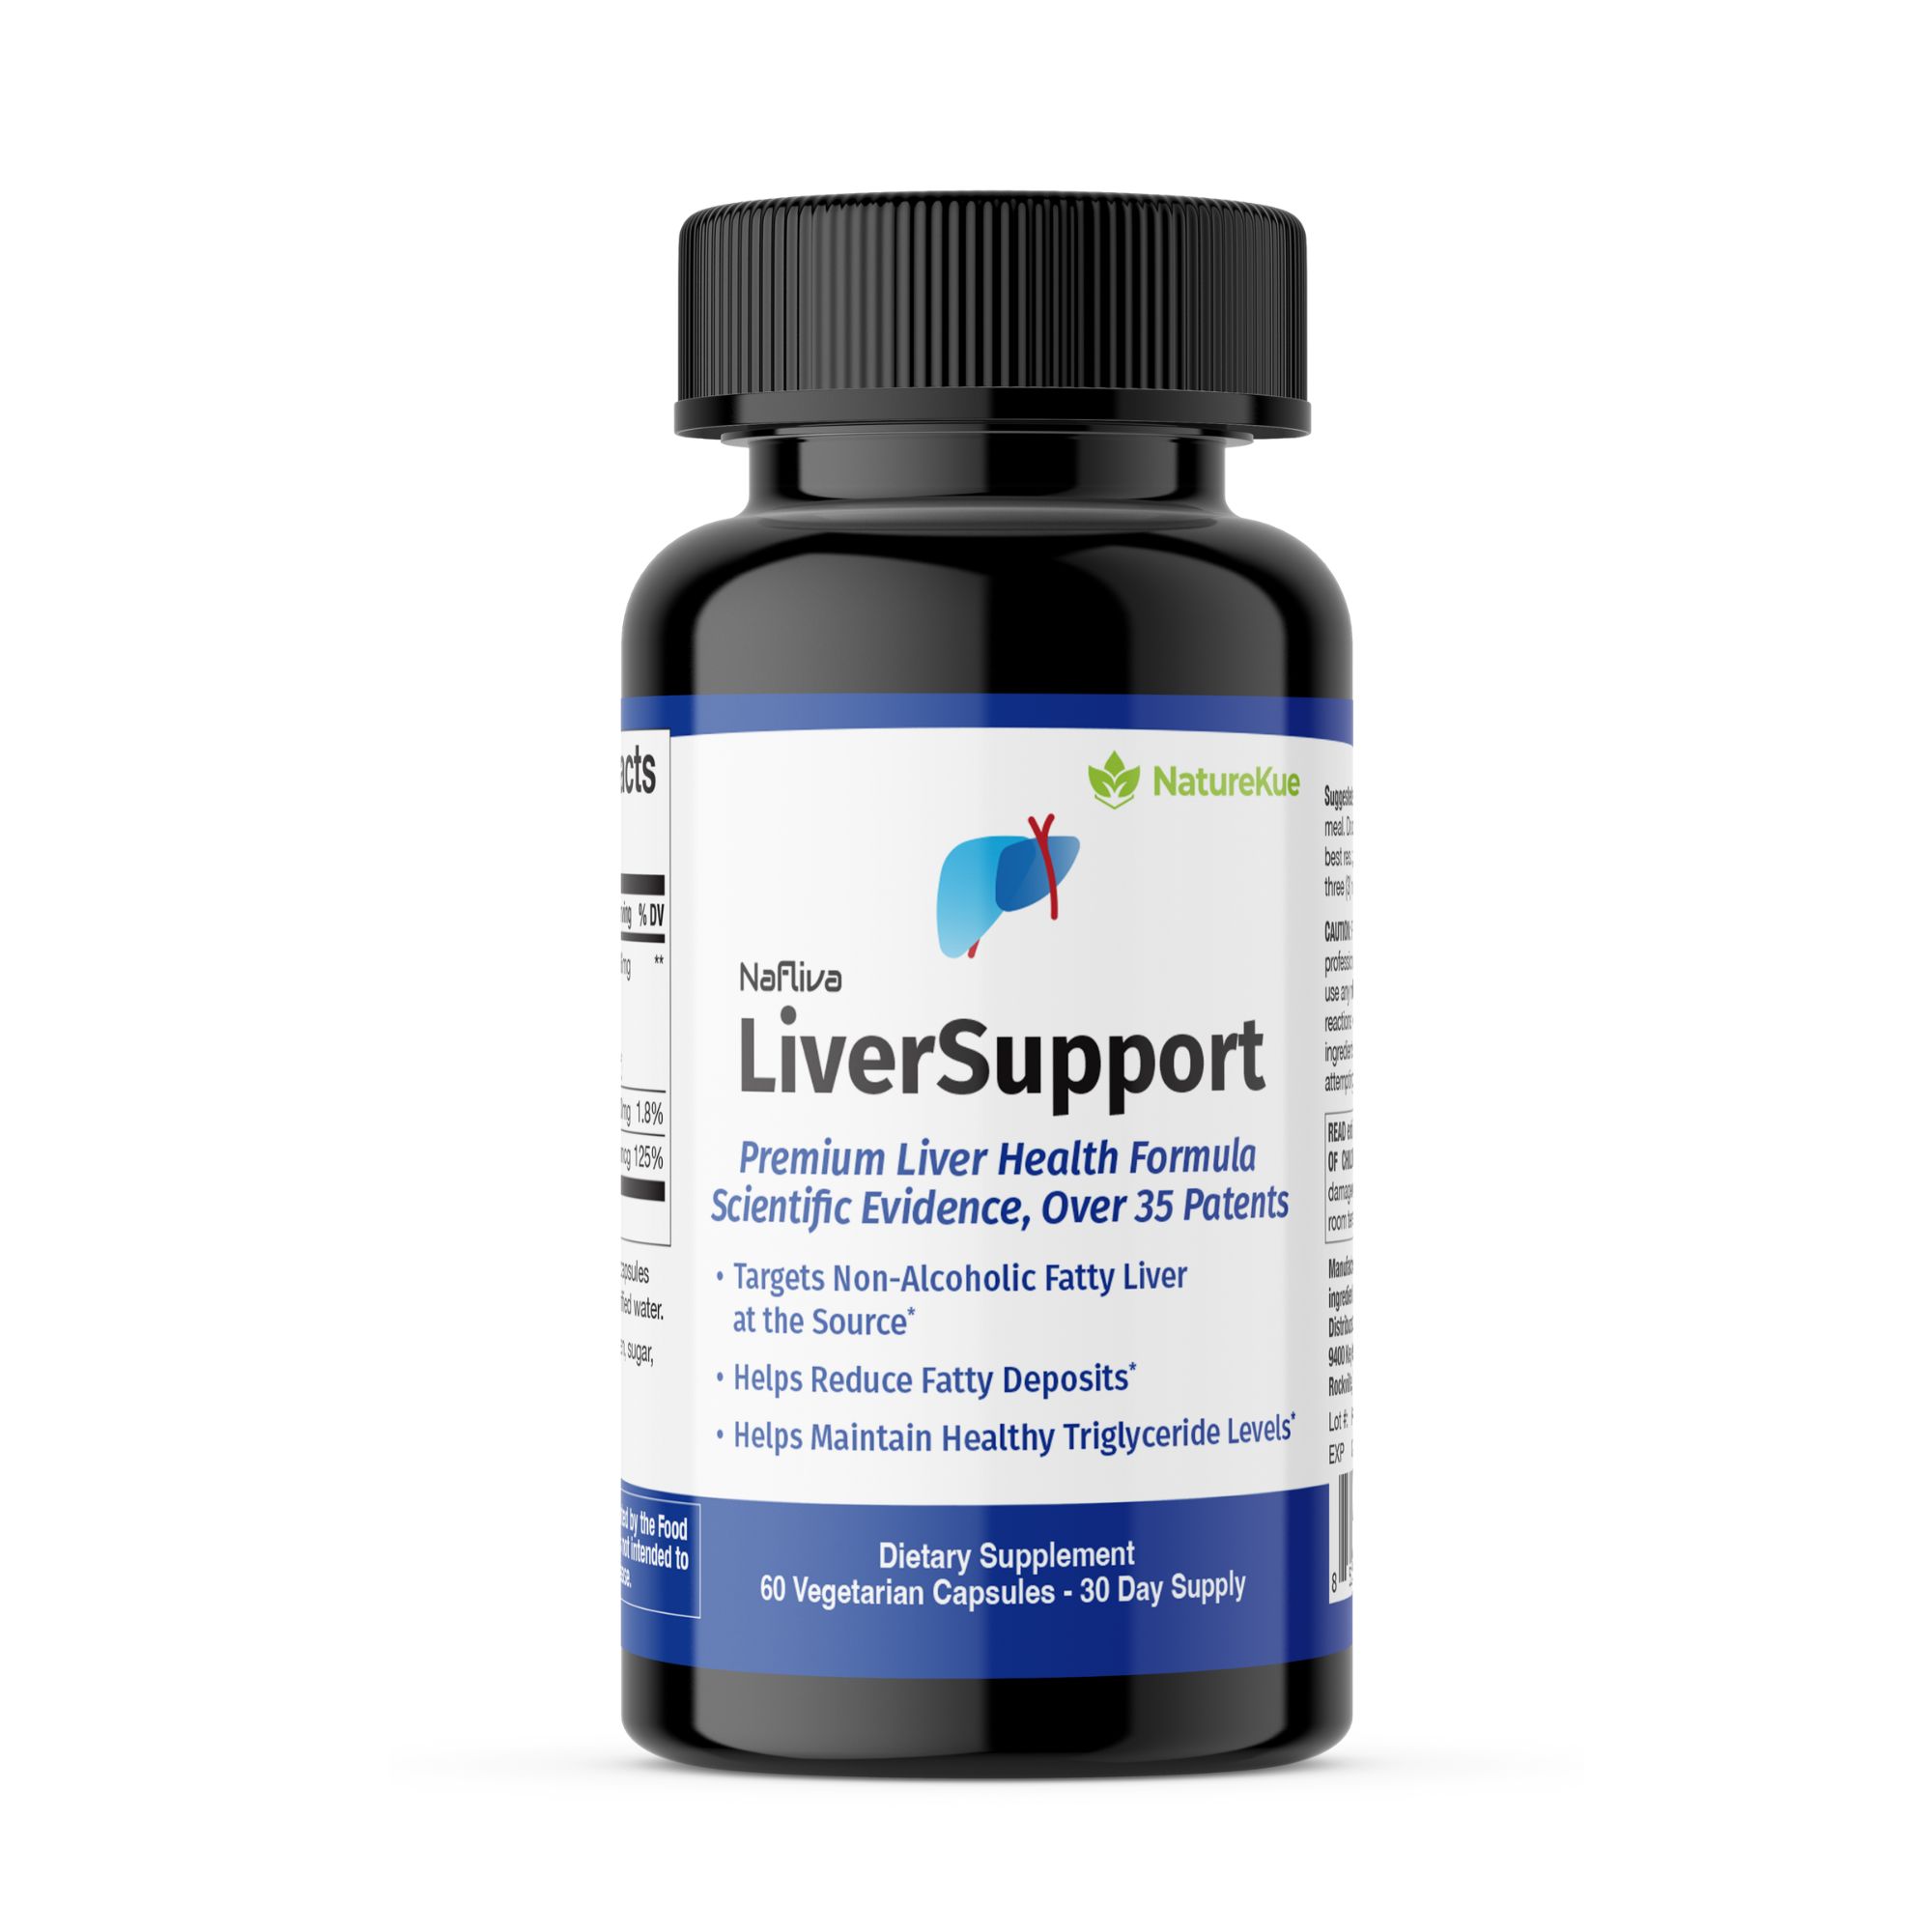 NatureKue Introduces LiverSupport - Natural Dietary Supplement Supports Healthy Liver Function as It Reduces Fatty Deposits